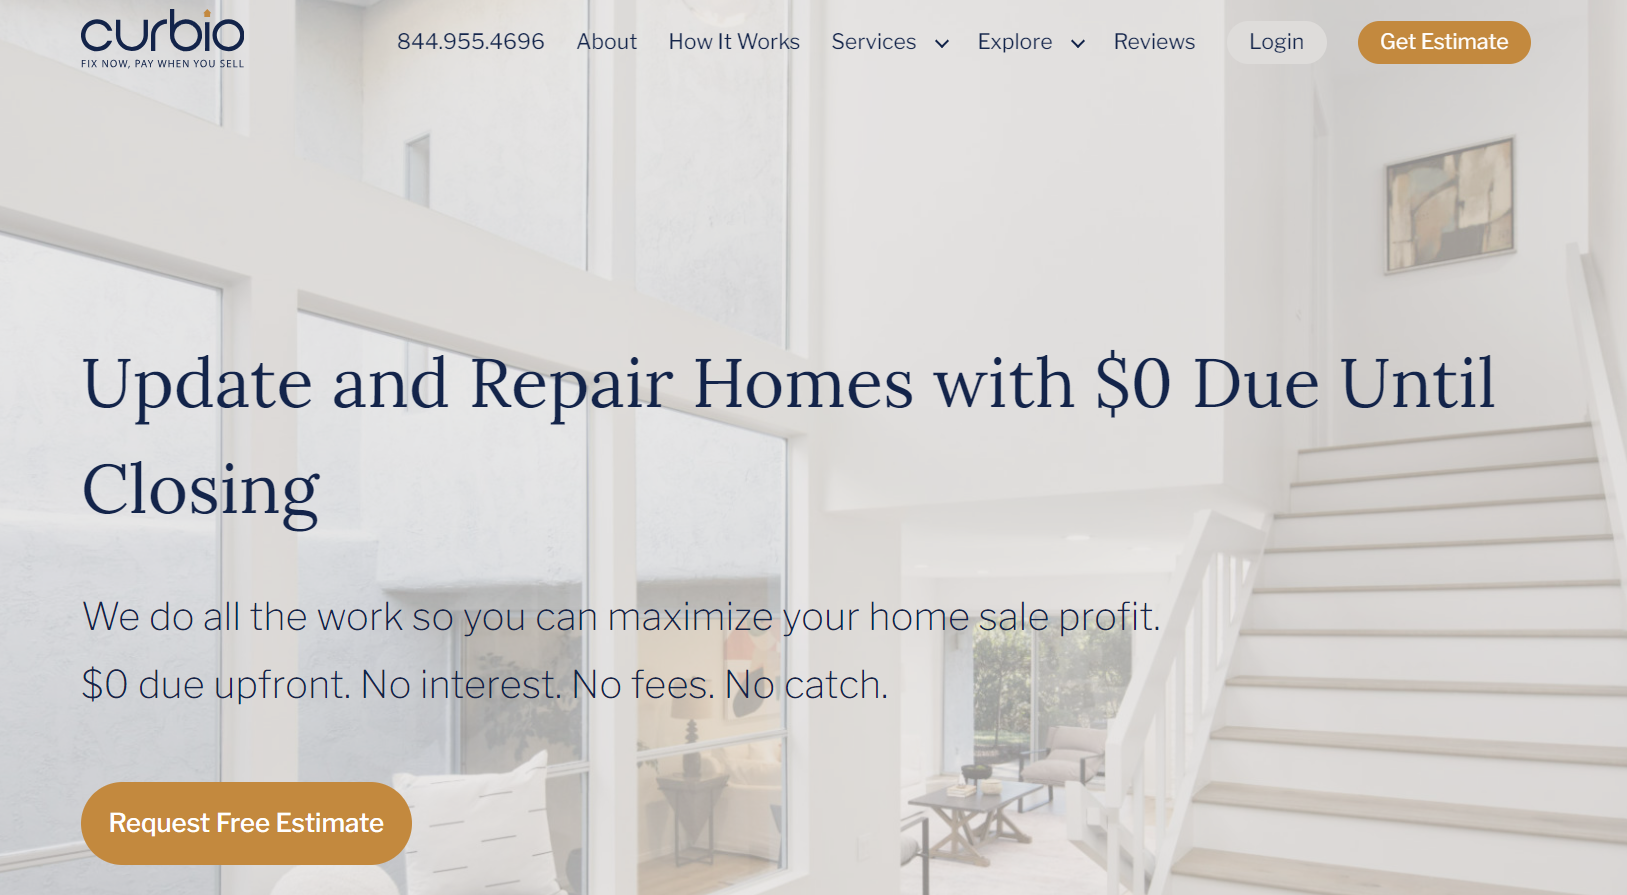 Curbio is a leading pay-at-closing home improvement service for real estate agents.